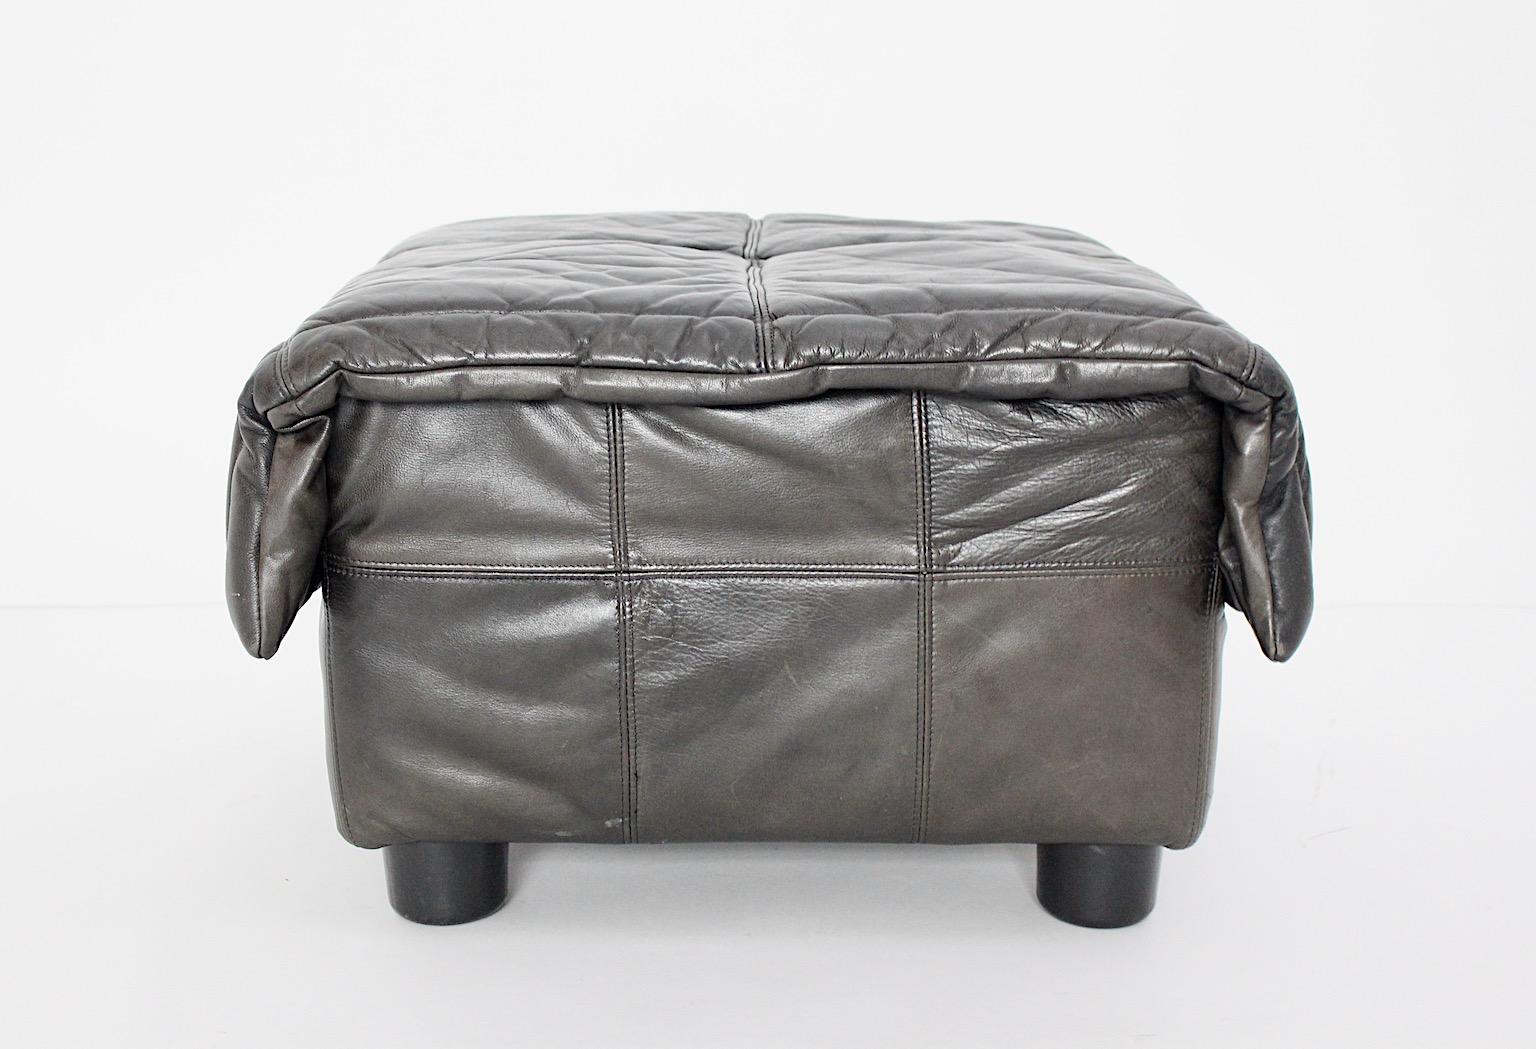 Mid-Century Modern vintage ottoman or stool De Sede style from patinated brown grey black leather with black plastic feet Italy 1970s.
The upholstered leather cloth shows stitched compartments in beautiful patinated leather. The leather color is a